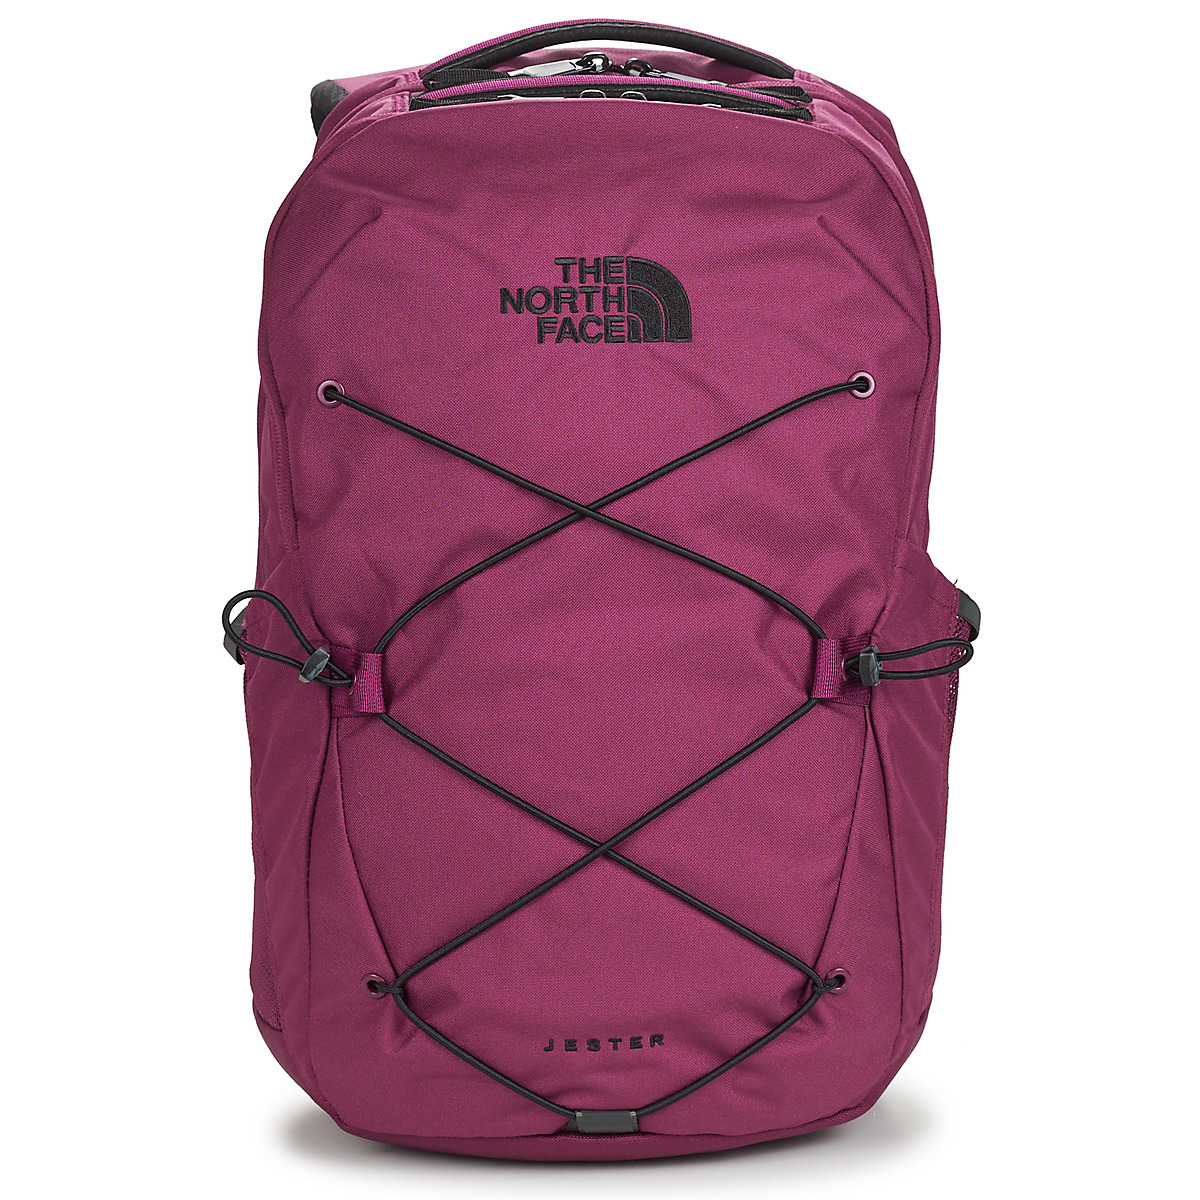 The North Face Jester Bordeaux - Free delivery